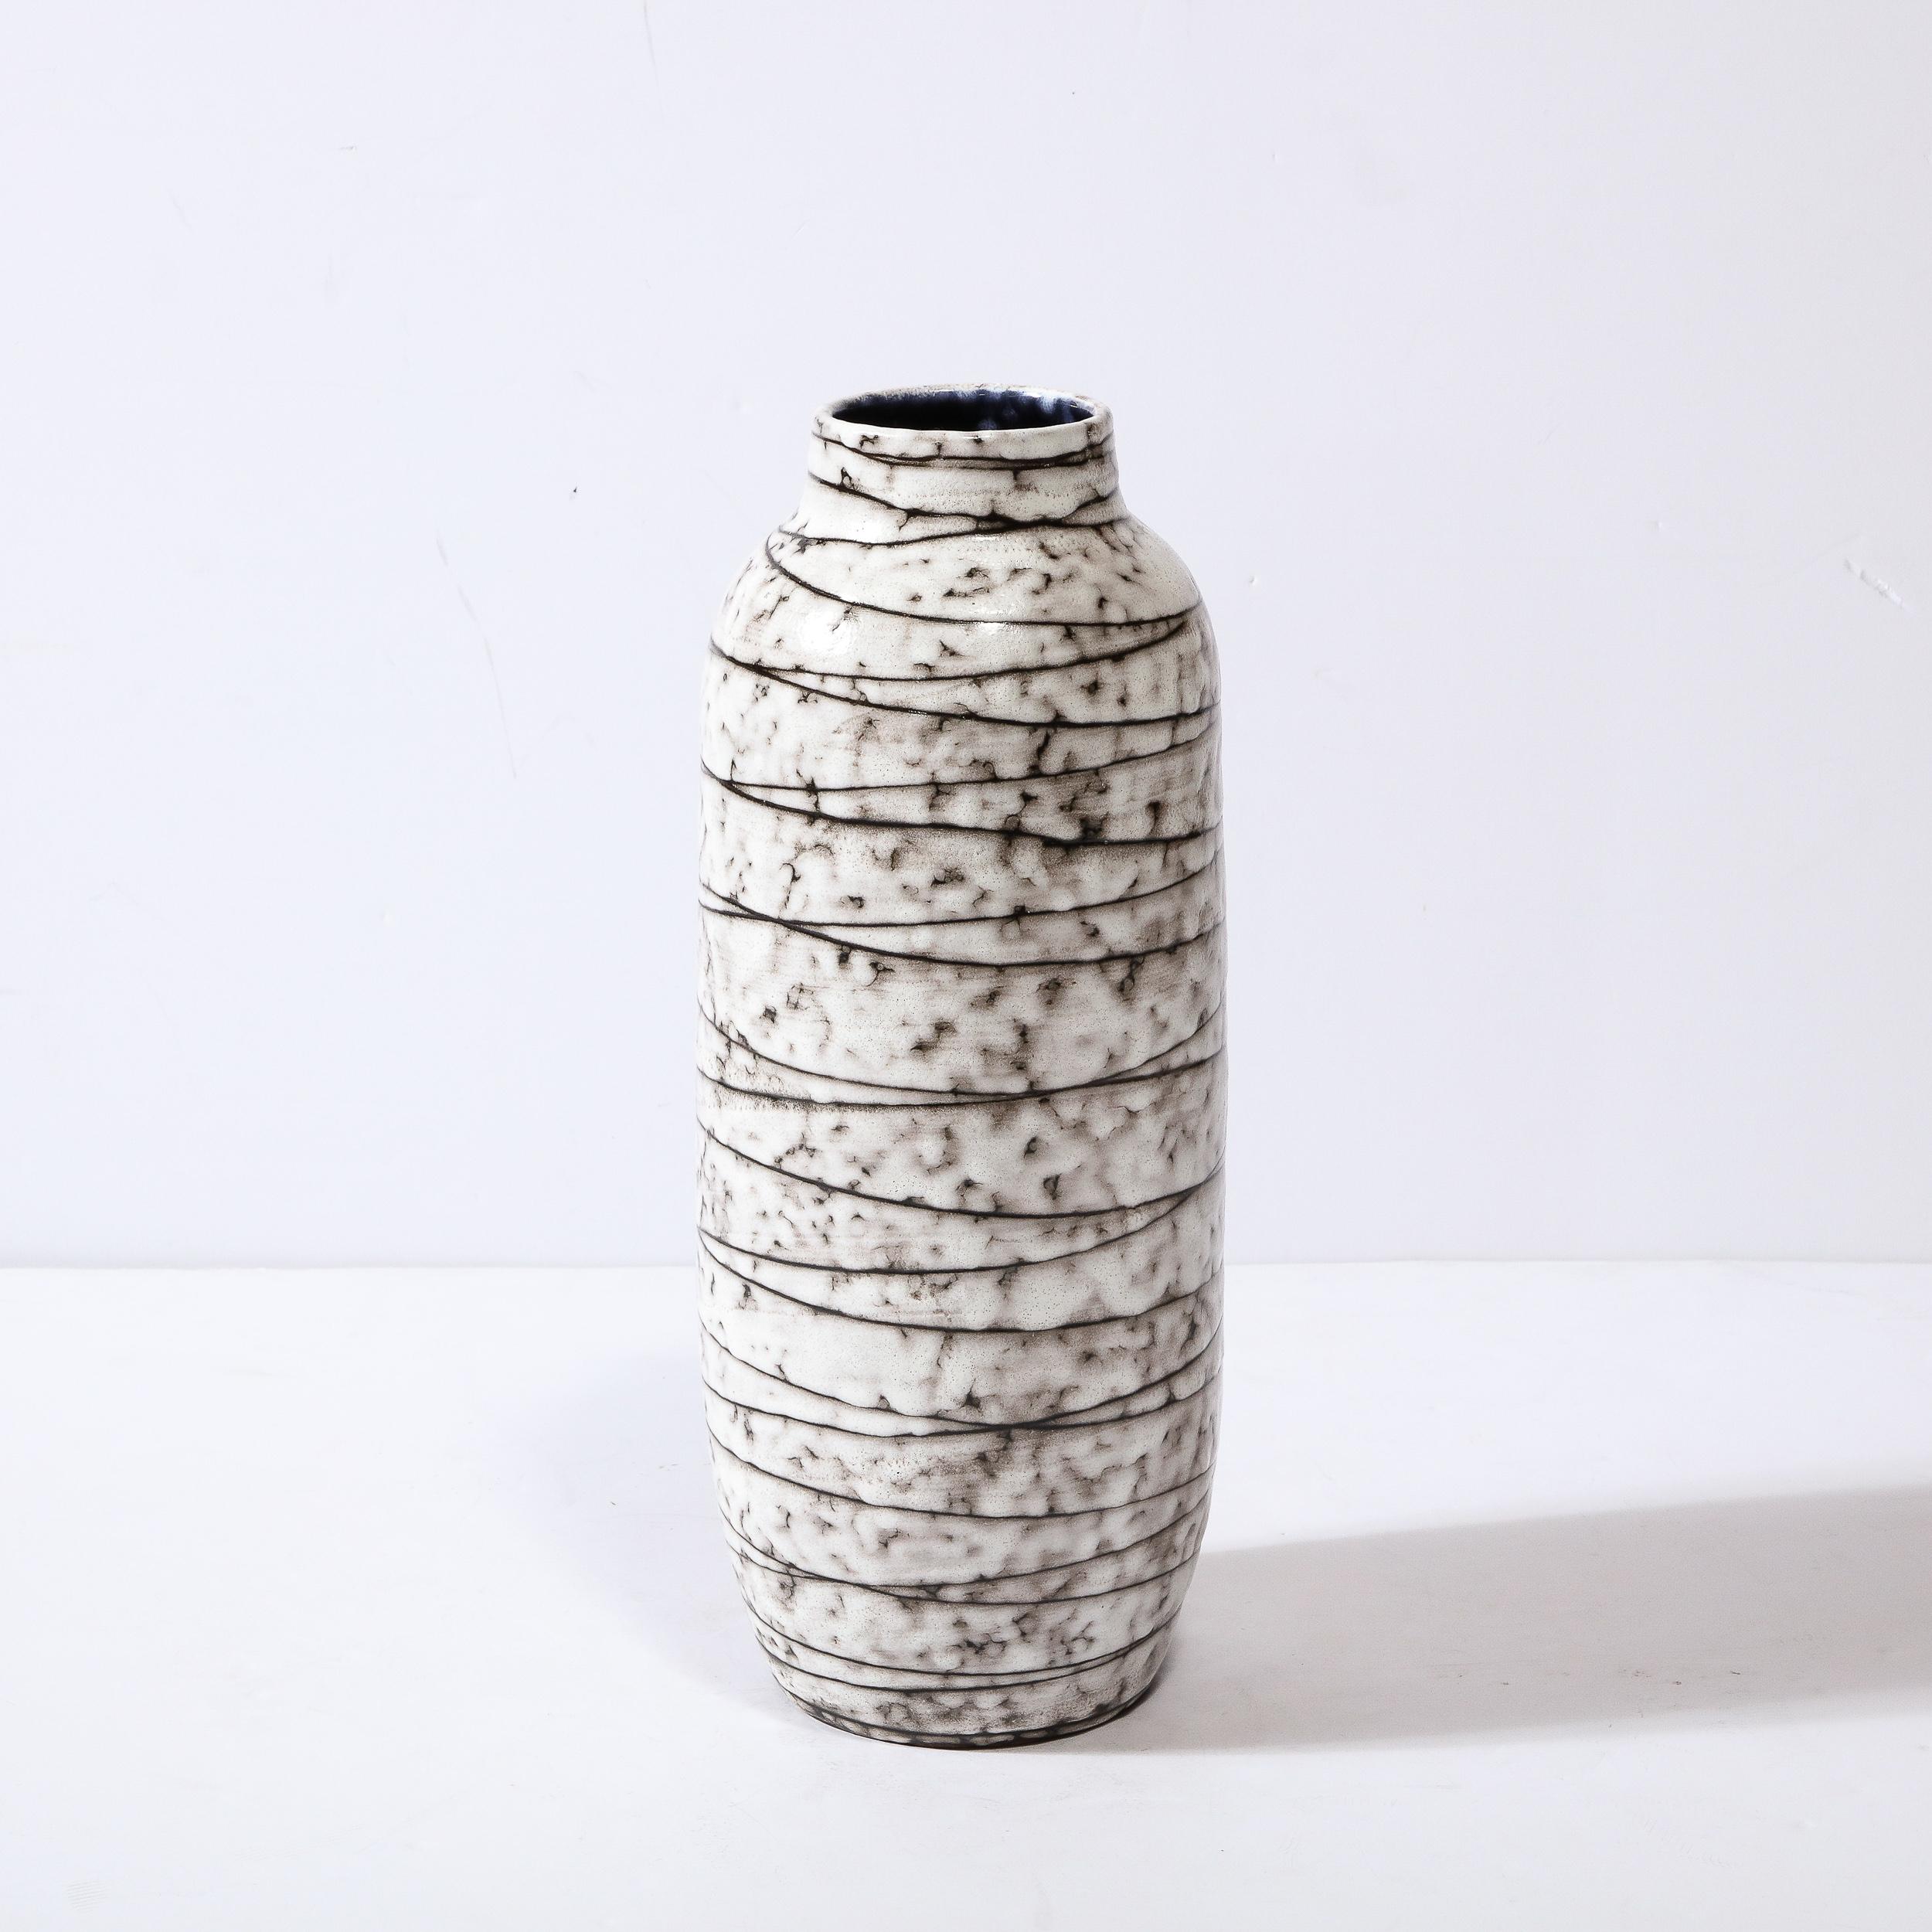 This Mid-Century Modernist Horizontally Striated Ceramic Vase is a beautiful example of Post War European Ceramics, realized in Hódmezovasarhely Majolikagyár, Hungary Circa 1960. With a Stunning textural finish composed in Cream White and Blackened